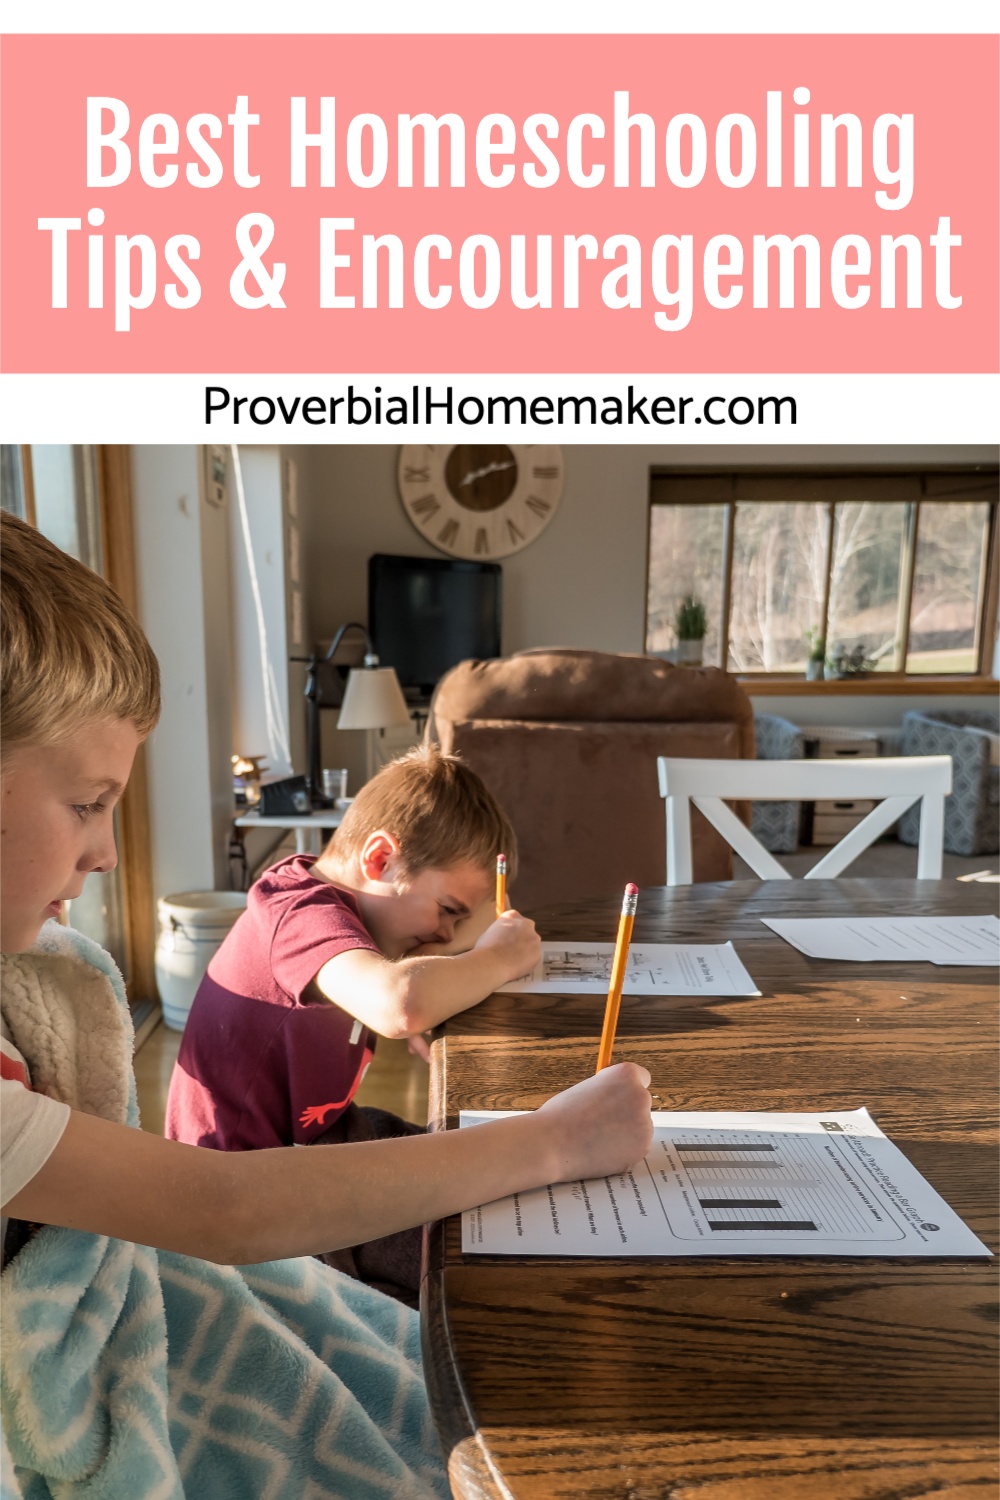 A roundup of all the best homeschool tips, encouragement, freebies, and more from Tauna at Proverbial Homemaker!